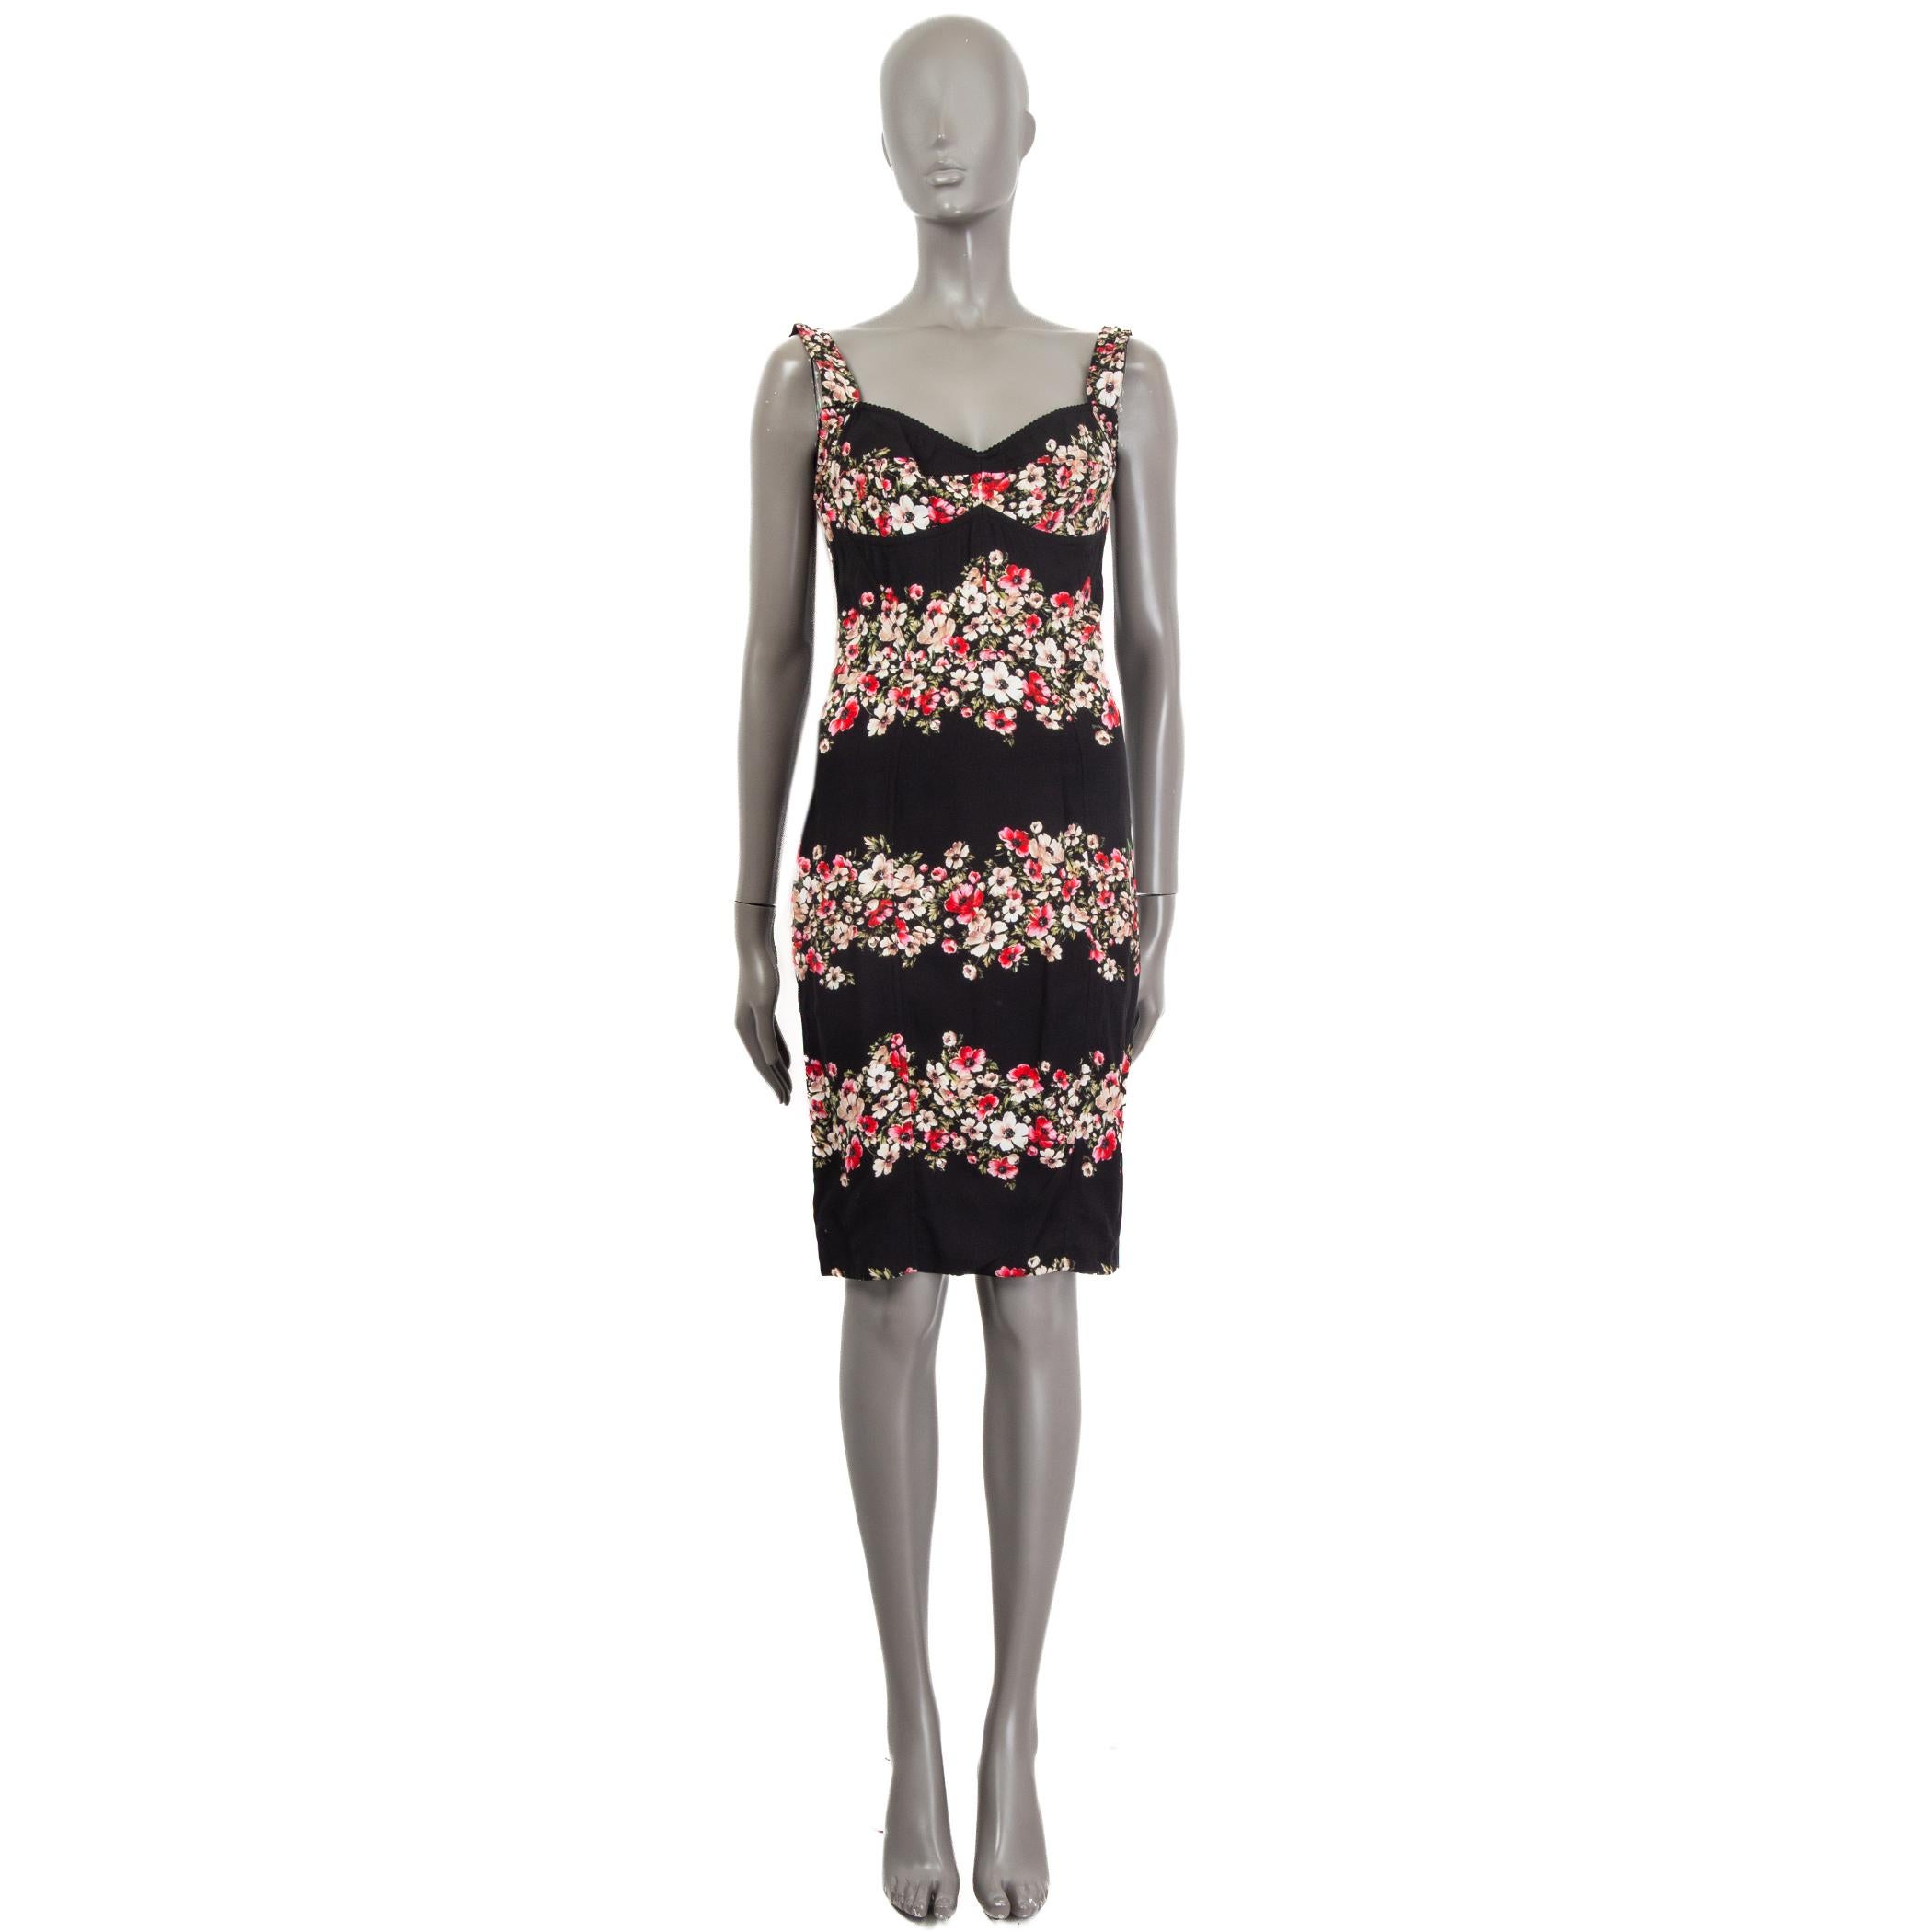 100% authentic Dolce & Gabbana floral bustier dress in black, pink, red, off-white and green viscose (70%), nylon (24%) and elastane (6%) with Sicilia Garland print. Opens with a zipper on the back. Lined in black silk (96%) and elastane (4%). Has